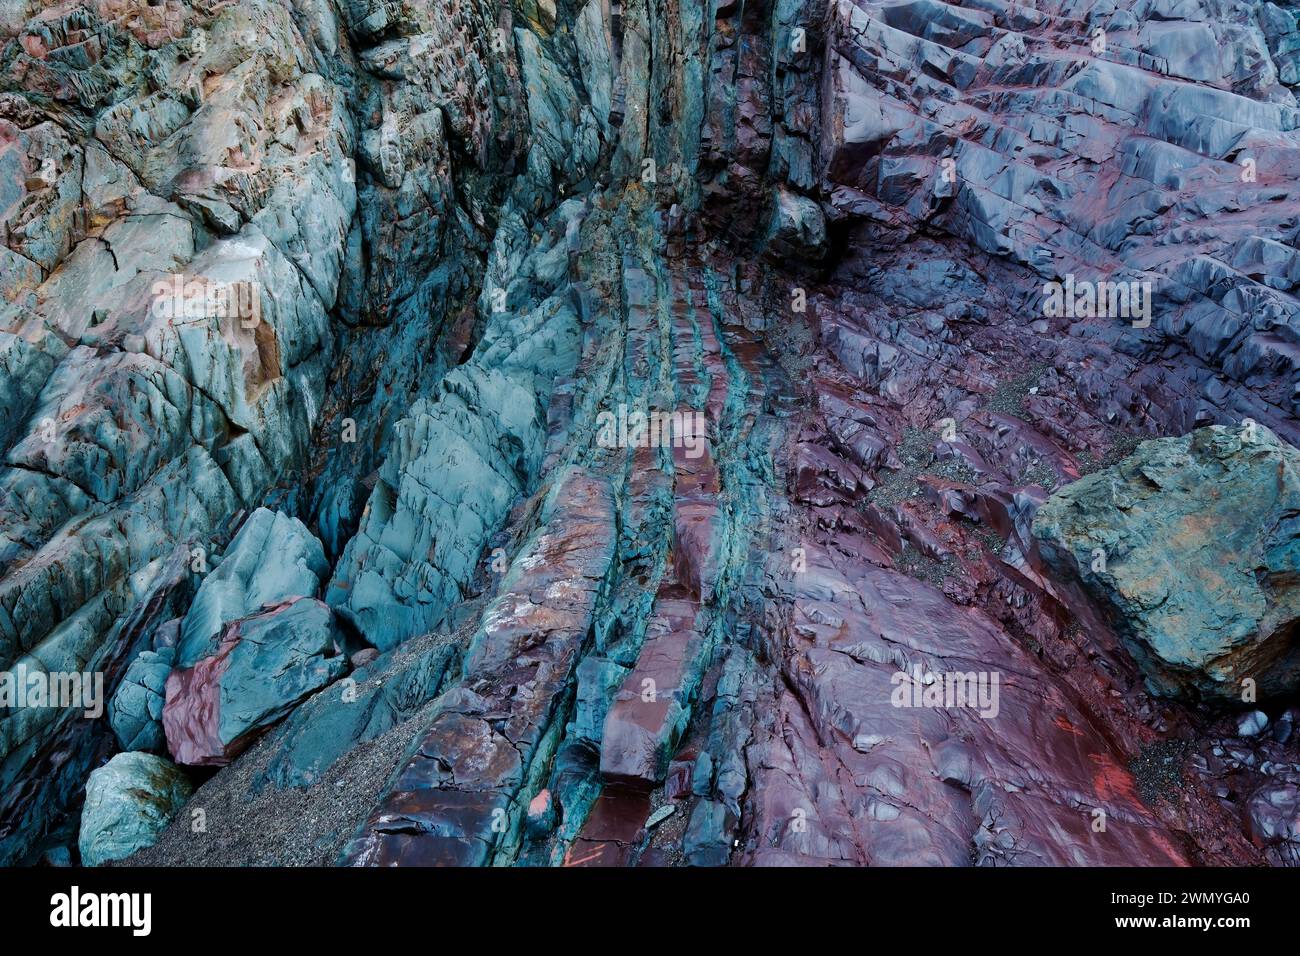 Rich biofilm bacteria proliferate on iron-rich rocks at the old mine beach of Llumeres, Asturias, showing a vivid color contrast. Stock Photo